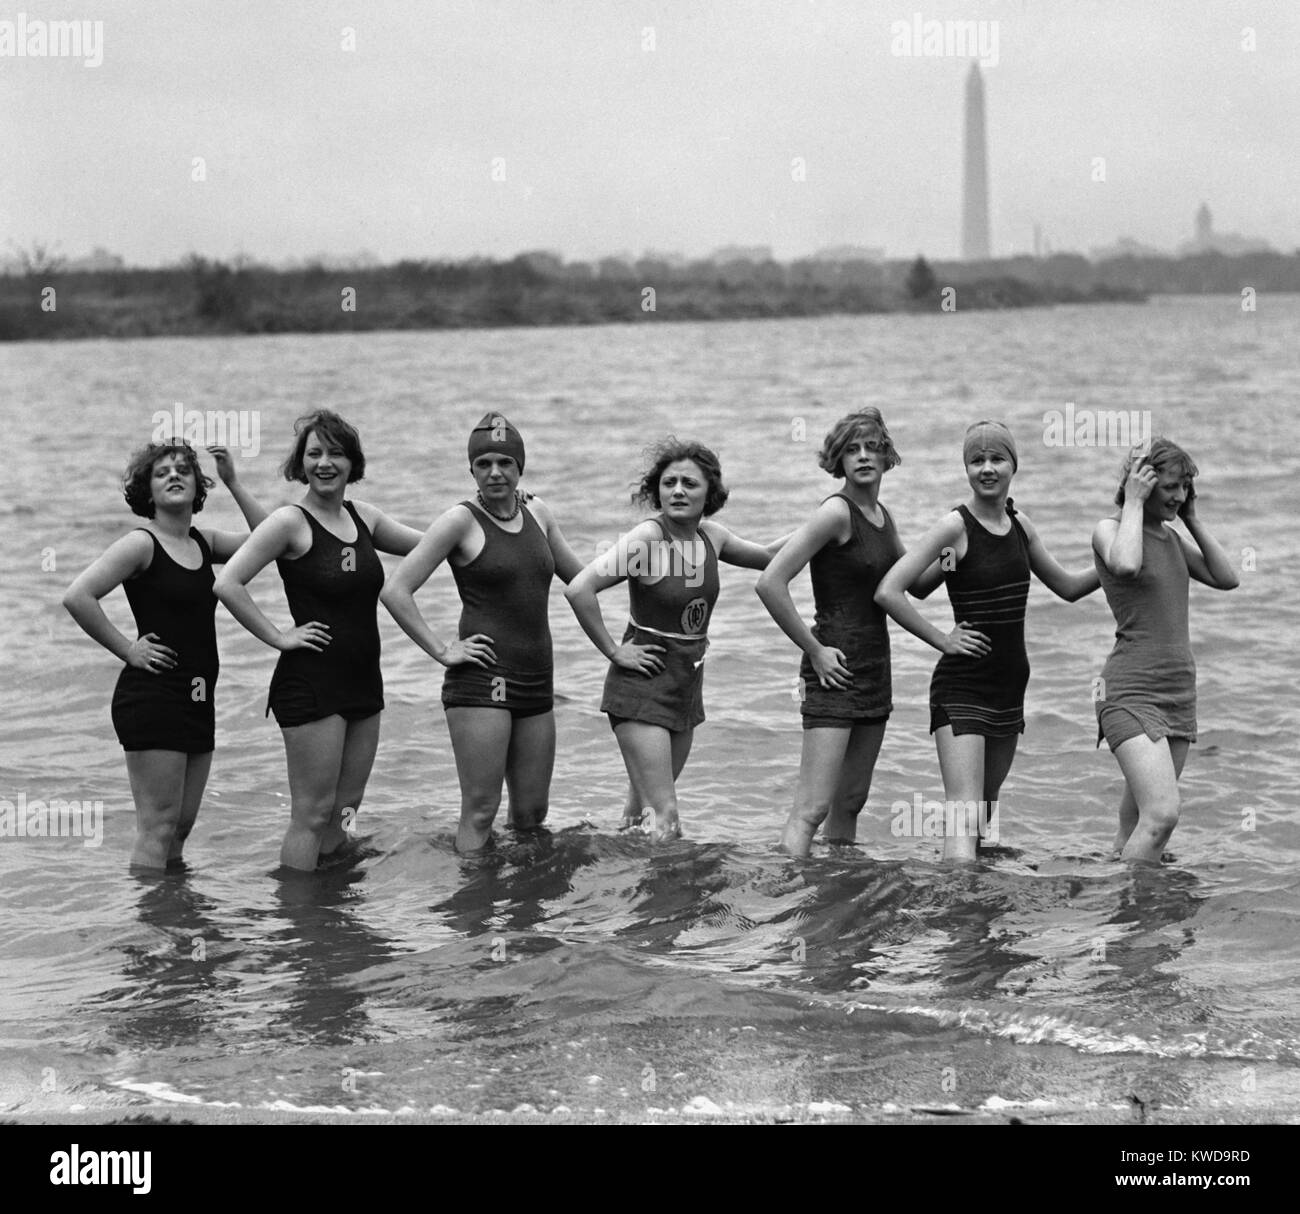 Seven young women in bathing suits in the Potomac River at Arlington Beach, April 29, 1925. In the background is the Washington Monument. (BSLOC 2015 17 200) Stock Photo